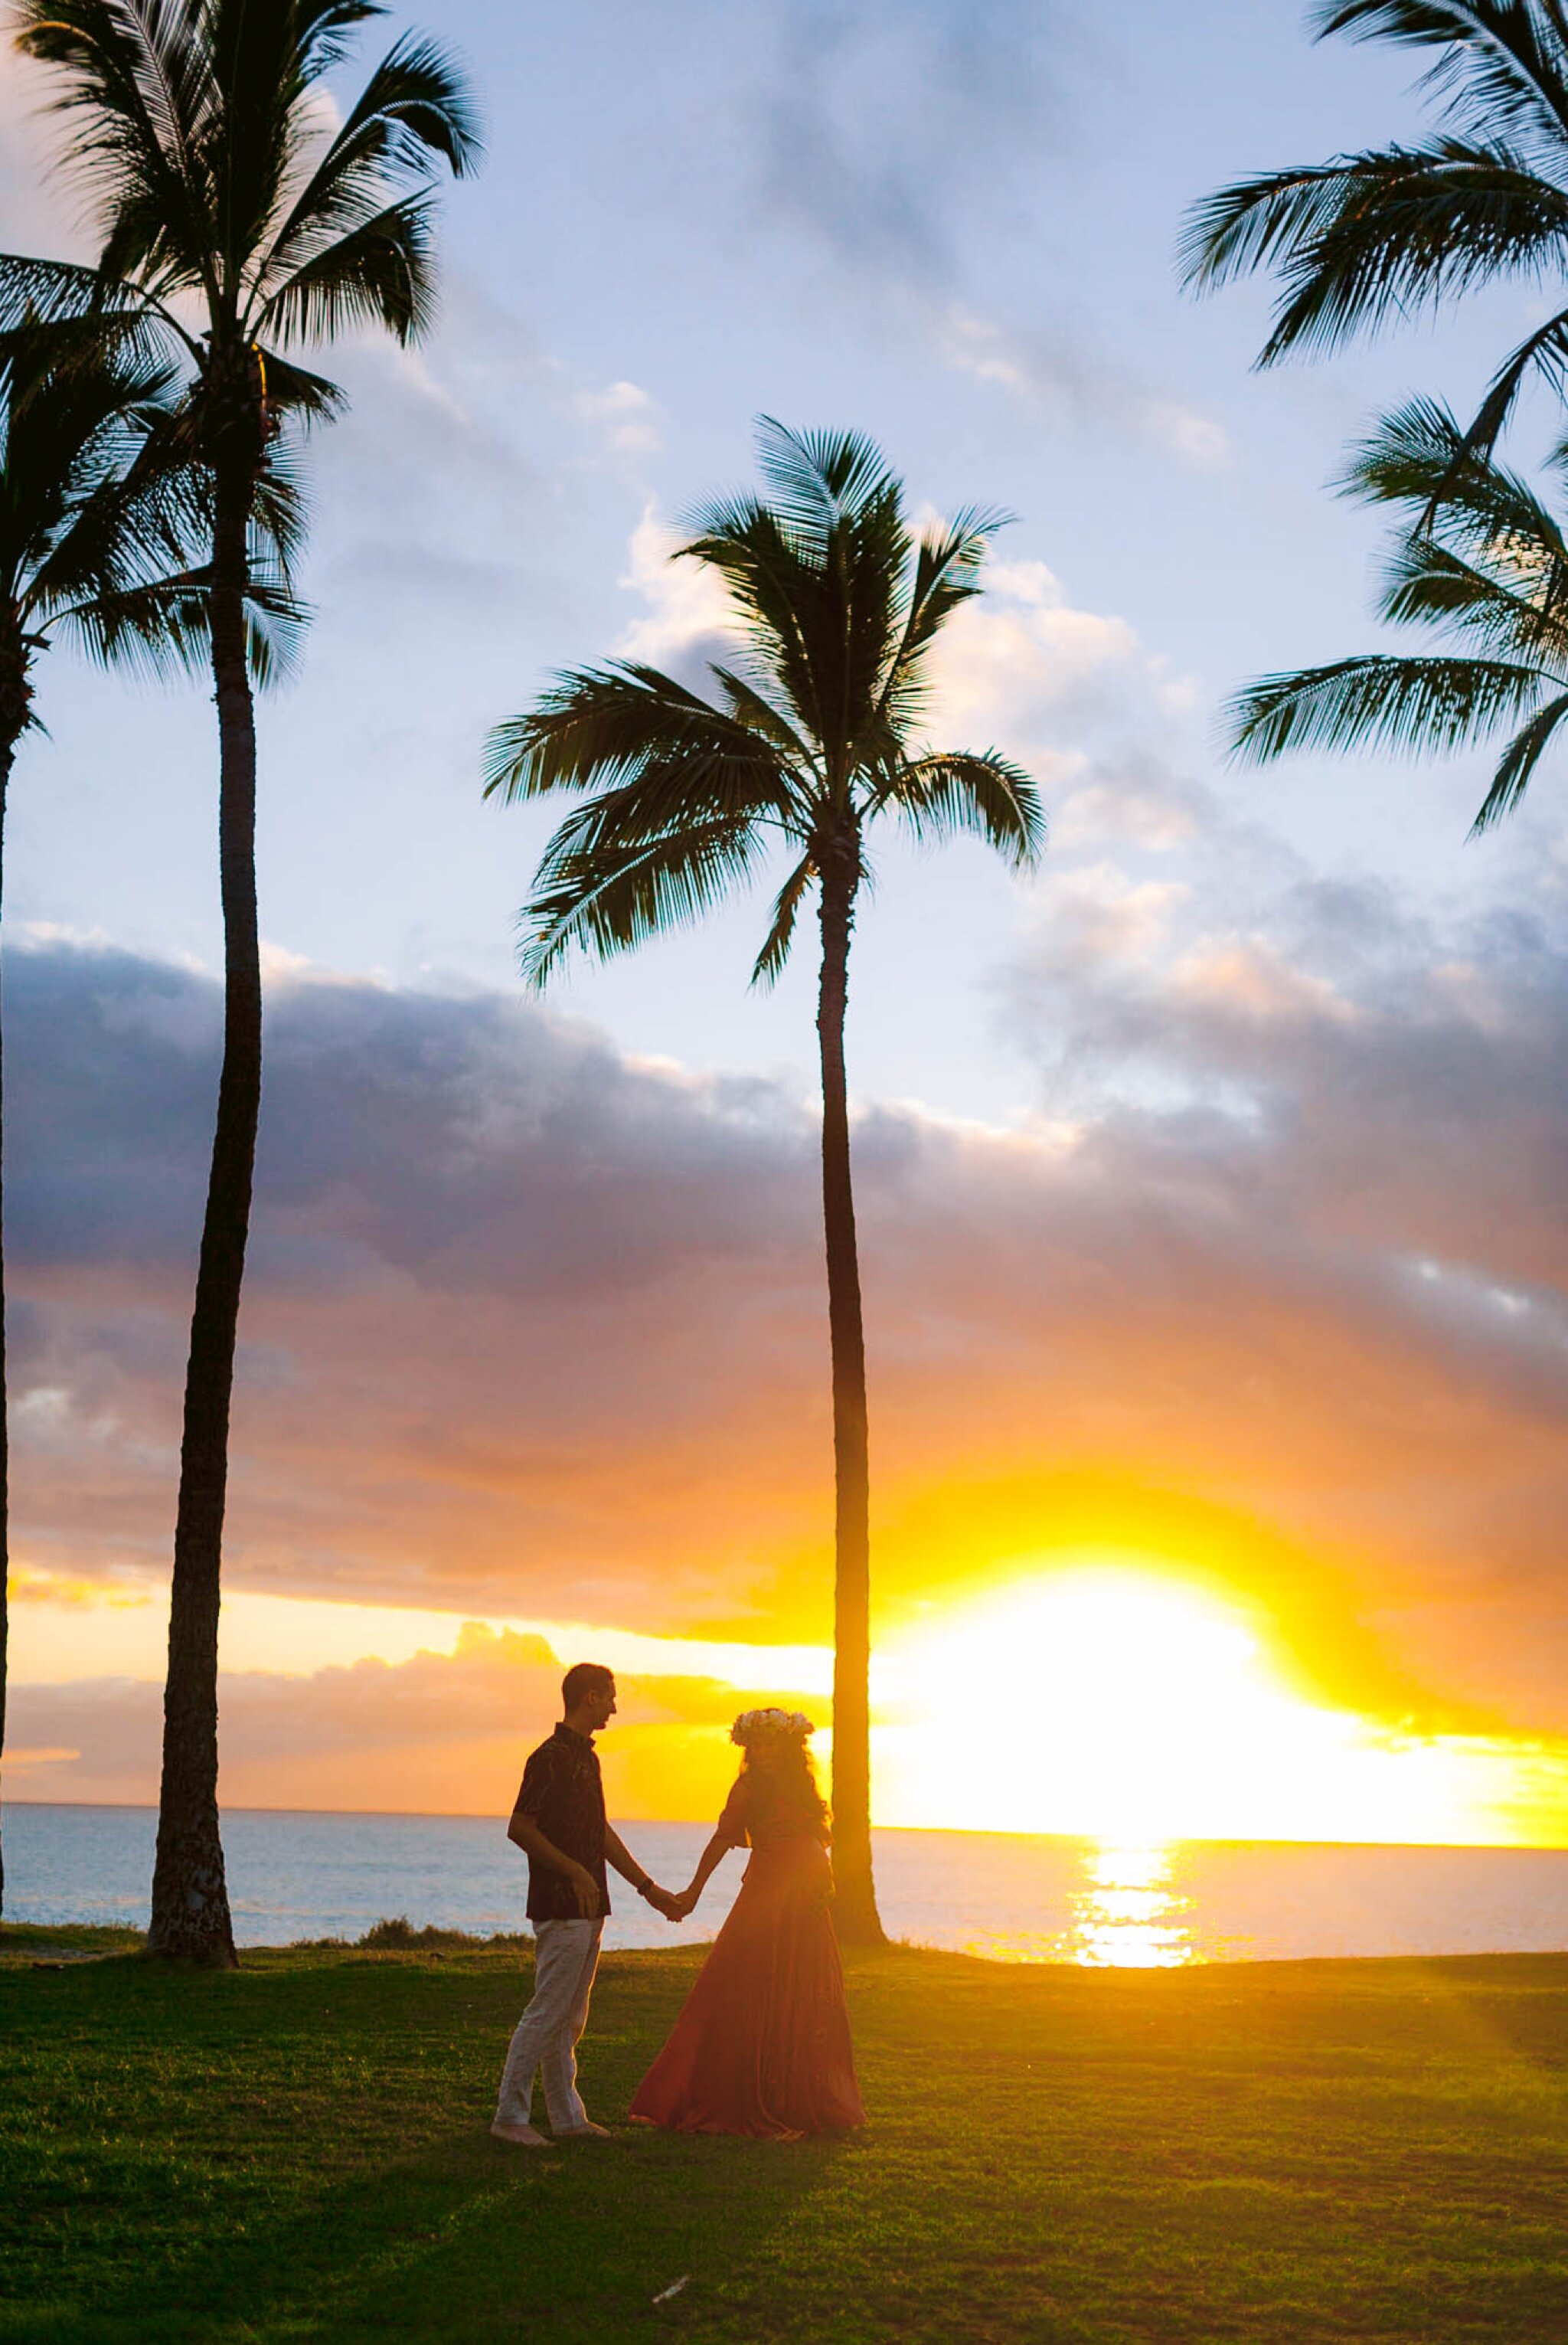 Colorful Sunset Maternity Photography Session at Maili Beach Park, Oahu West Side - Hawaii Family Photographer